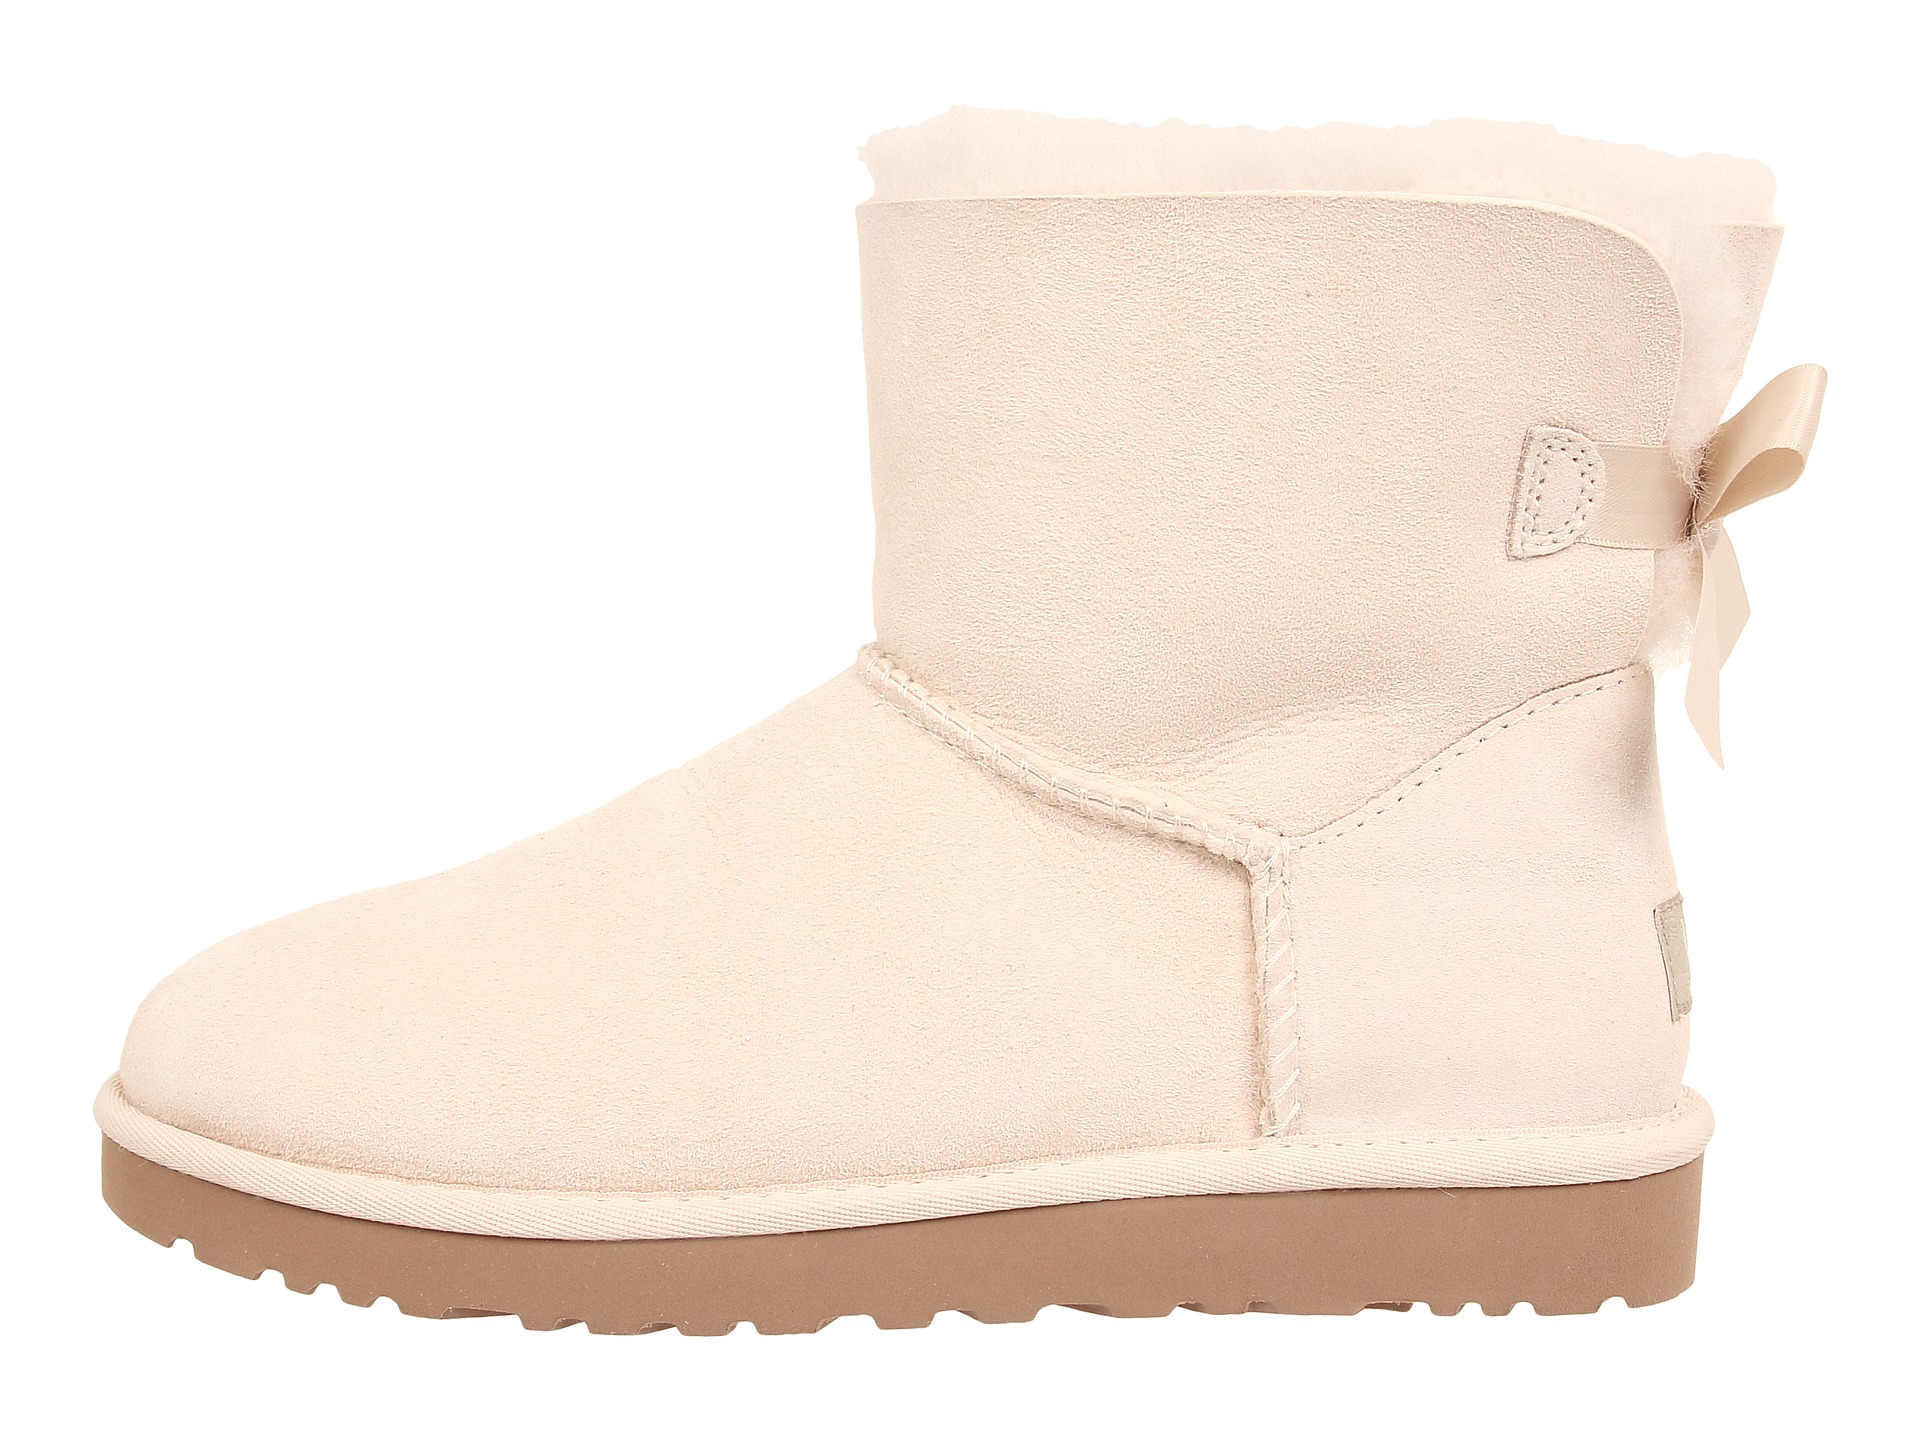 white ugg boots with bows